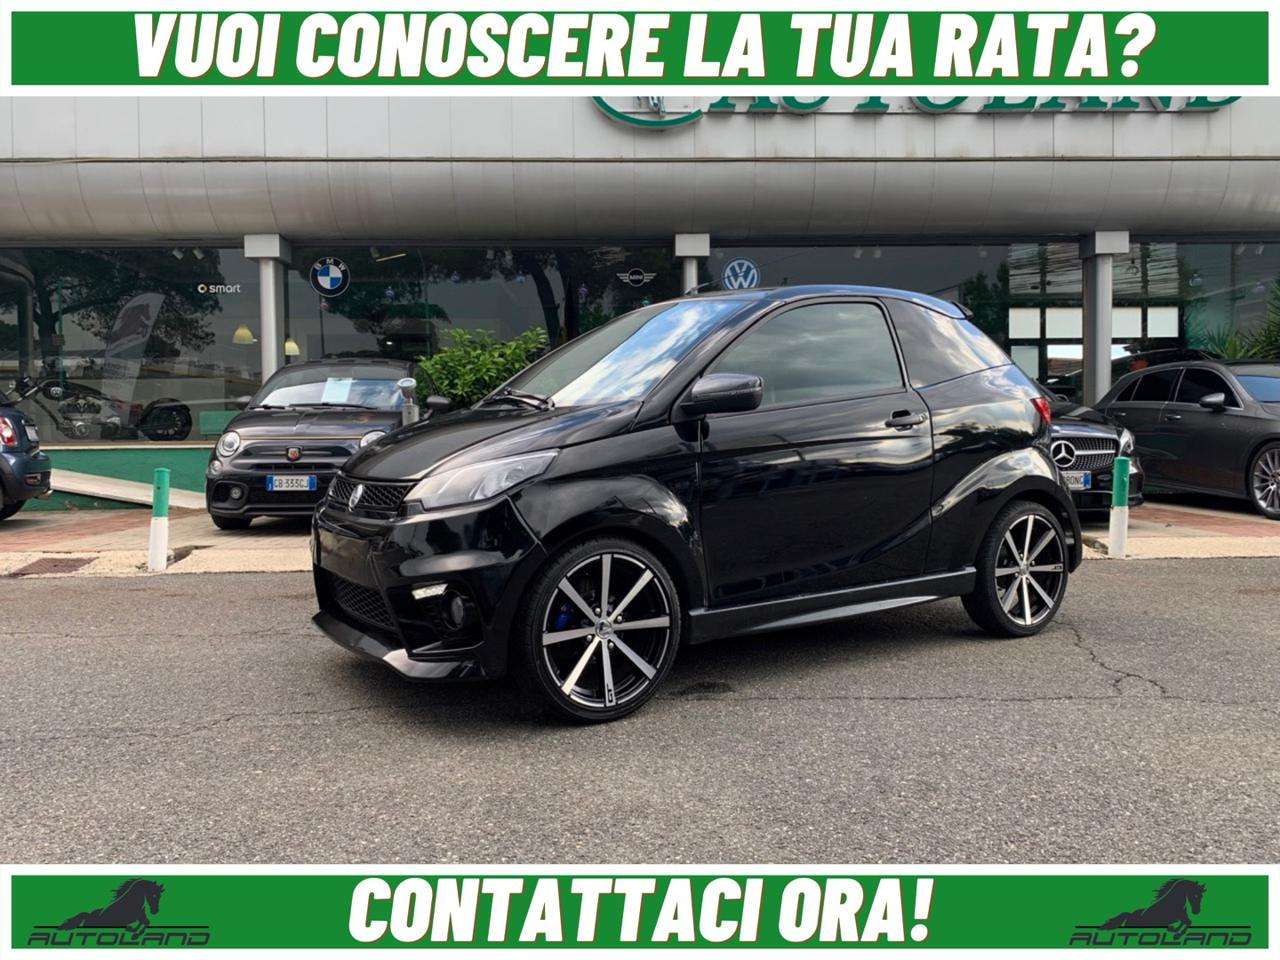 Aixam City Compact in Black used in Guidonia Montecelio - Roma - Rm for € 8,900.-